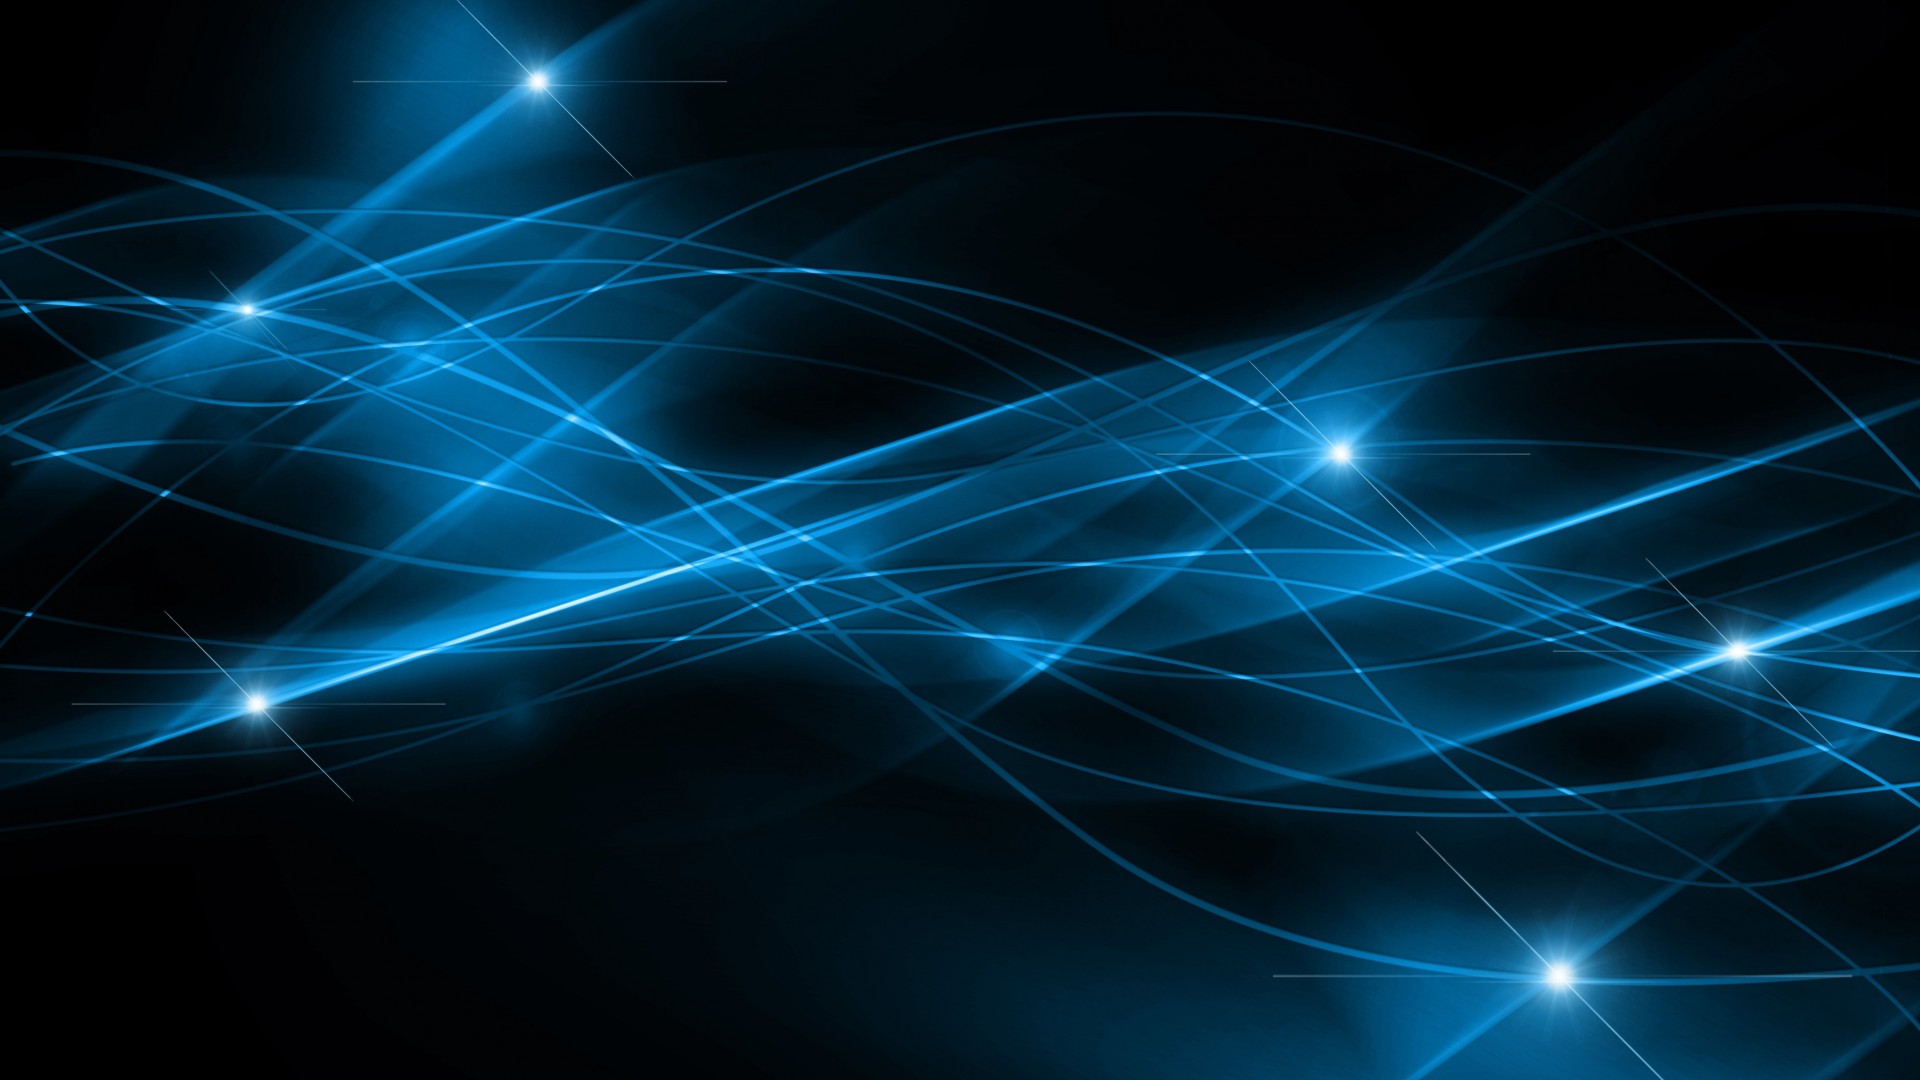  1080 Black And Blue Abstract Backgrounds Hd 1080P 12 HD Wallpapers